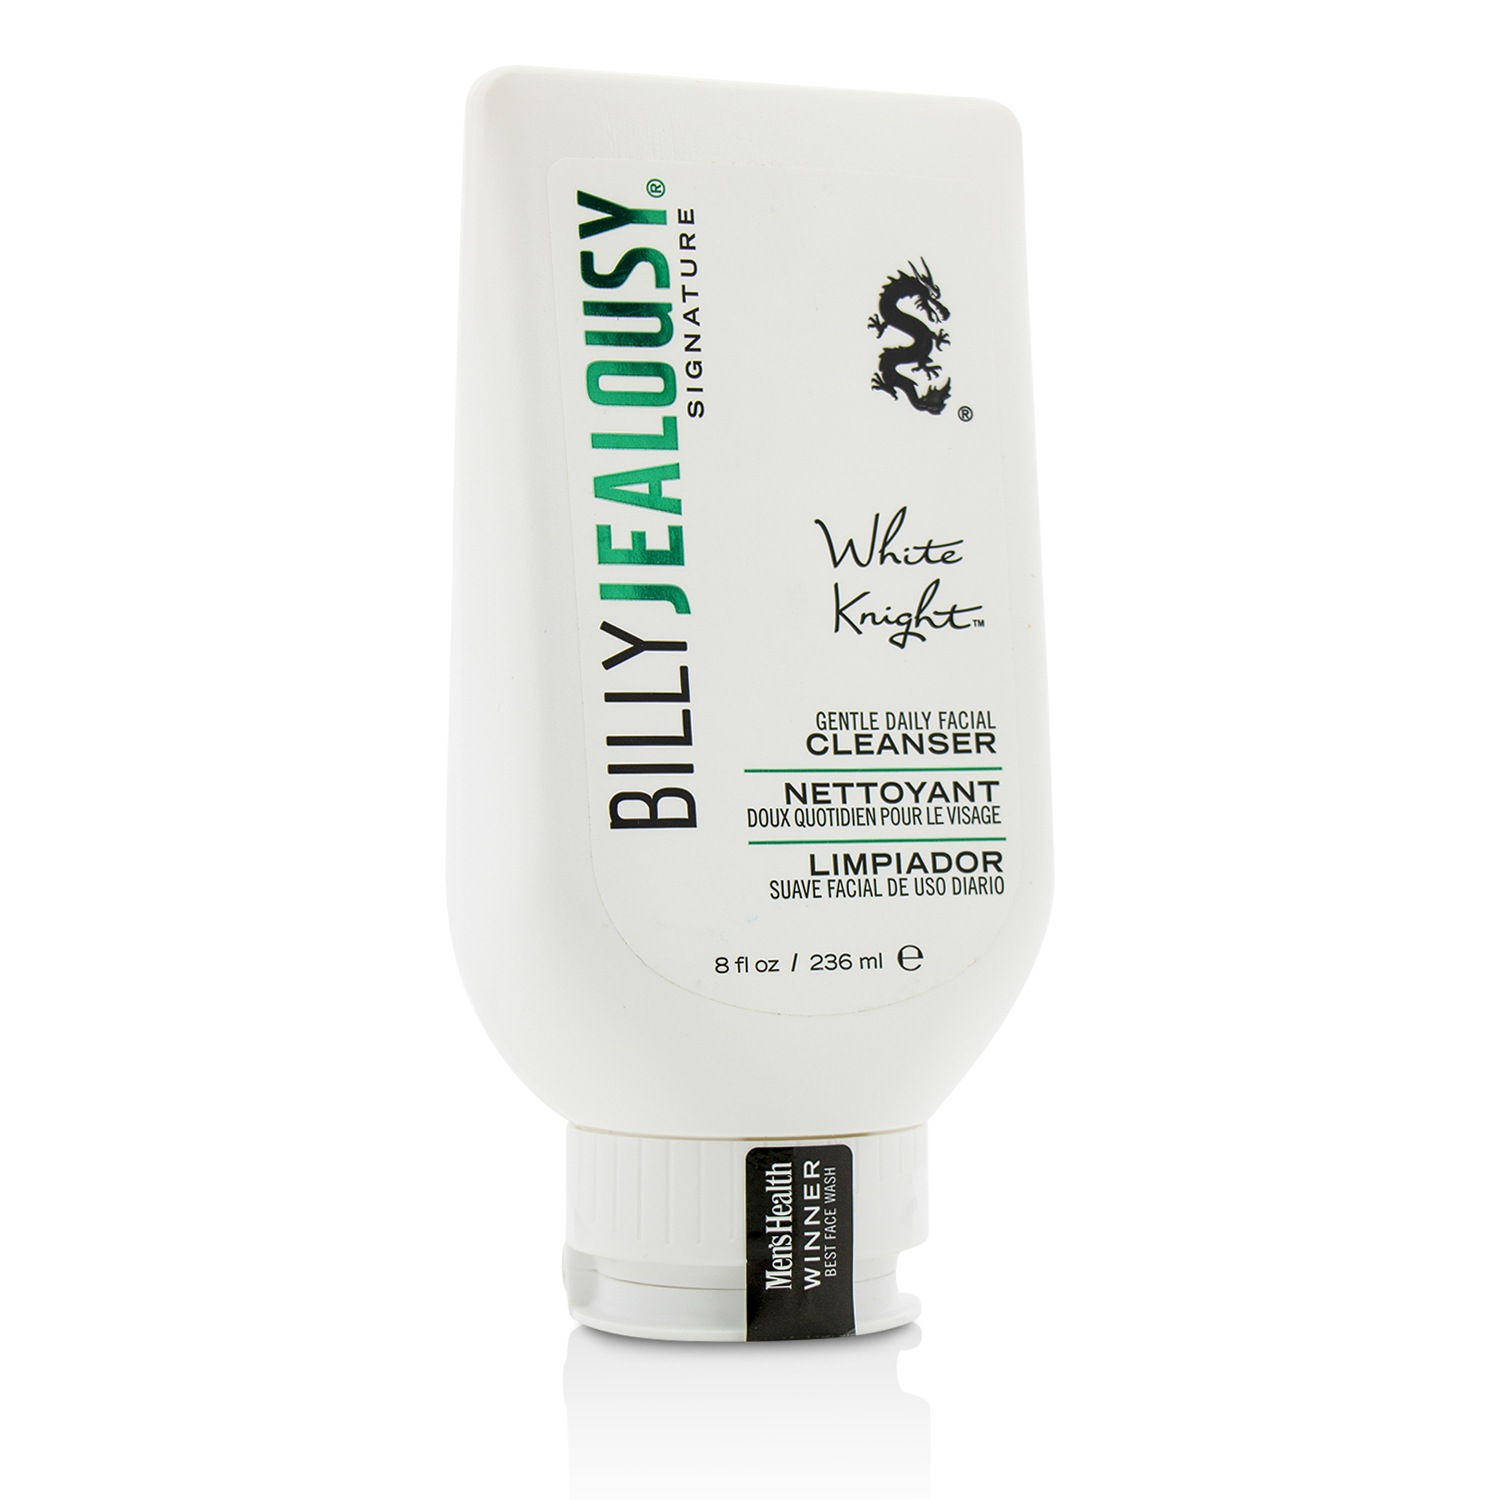 Signature White Knight Gentle Daily Facial Cleanser Billy Jealousy Image